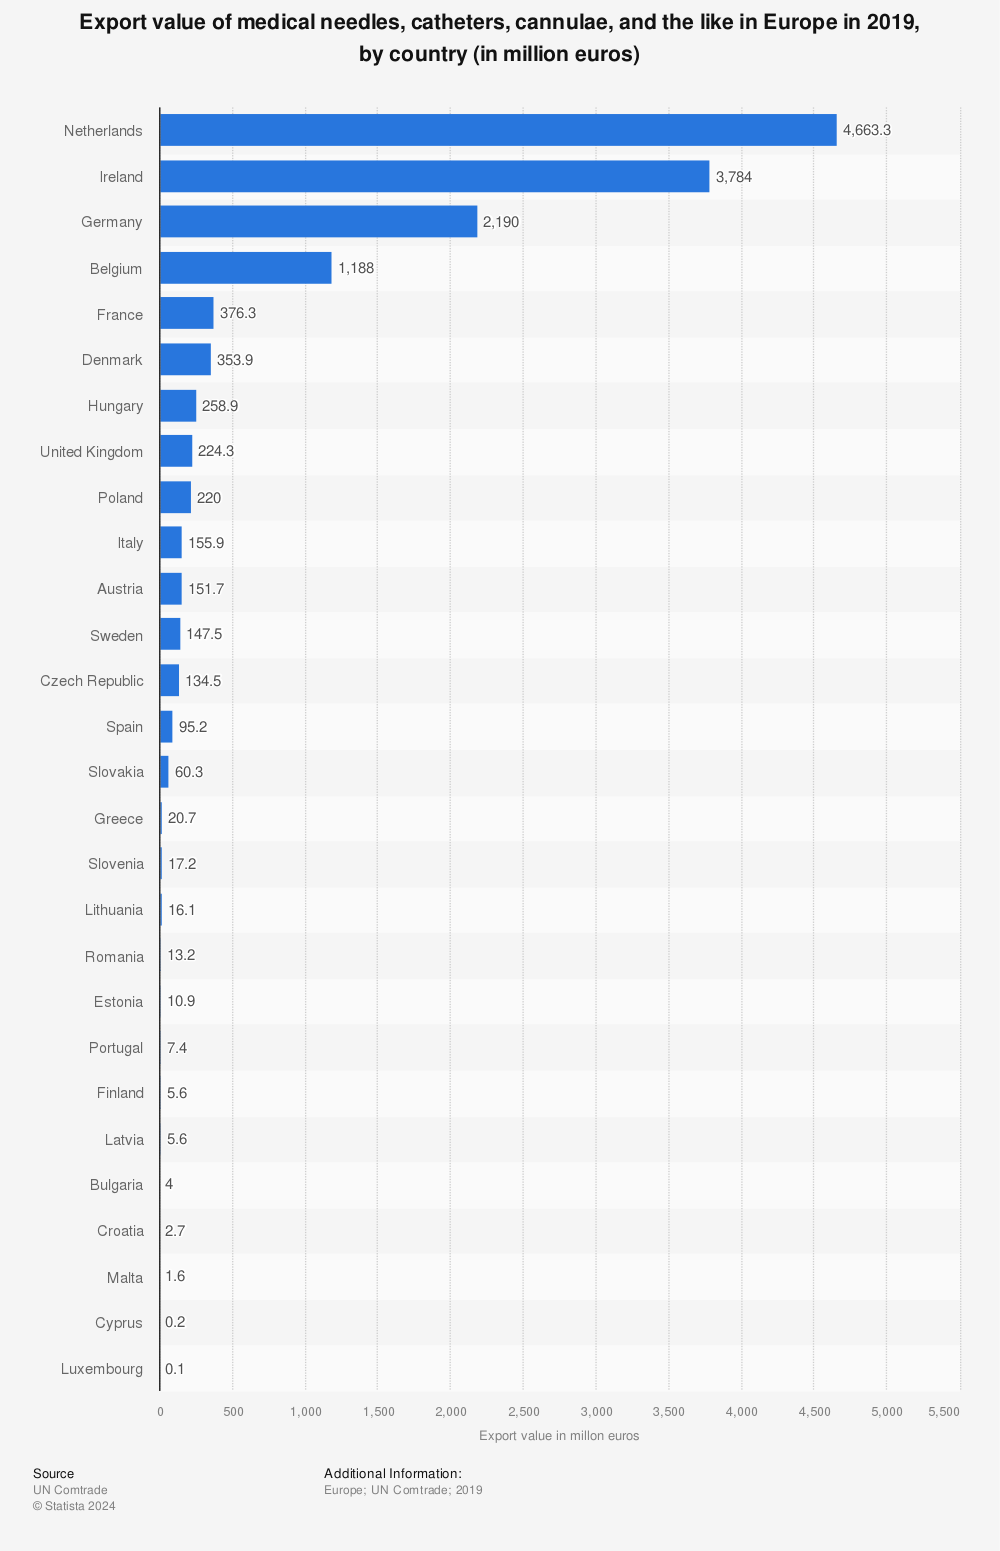 Statistic: Export value of medical needles, catheters, cannulae, and the like in Europe in 2019, by country (in million euros) | Statista